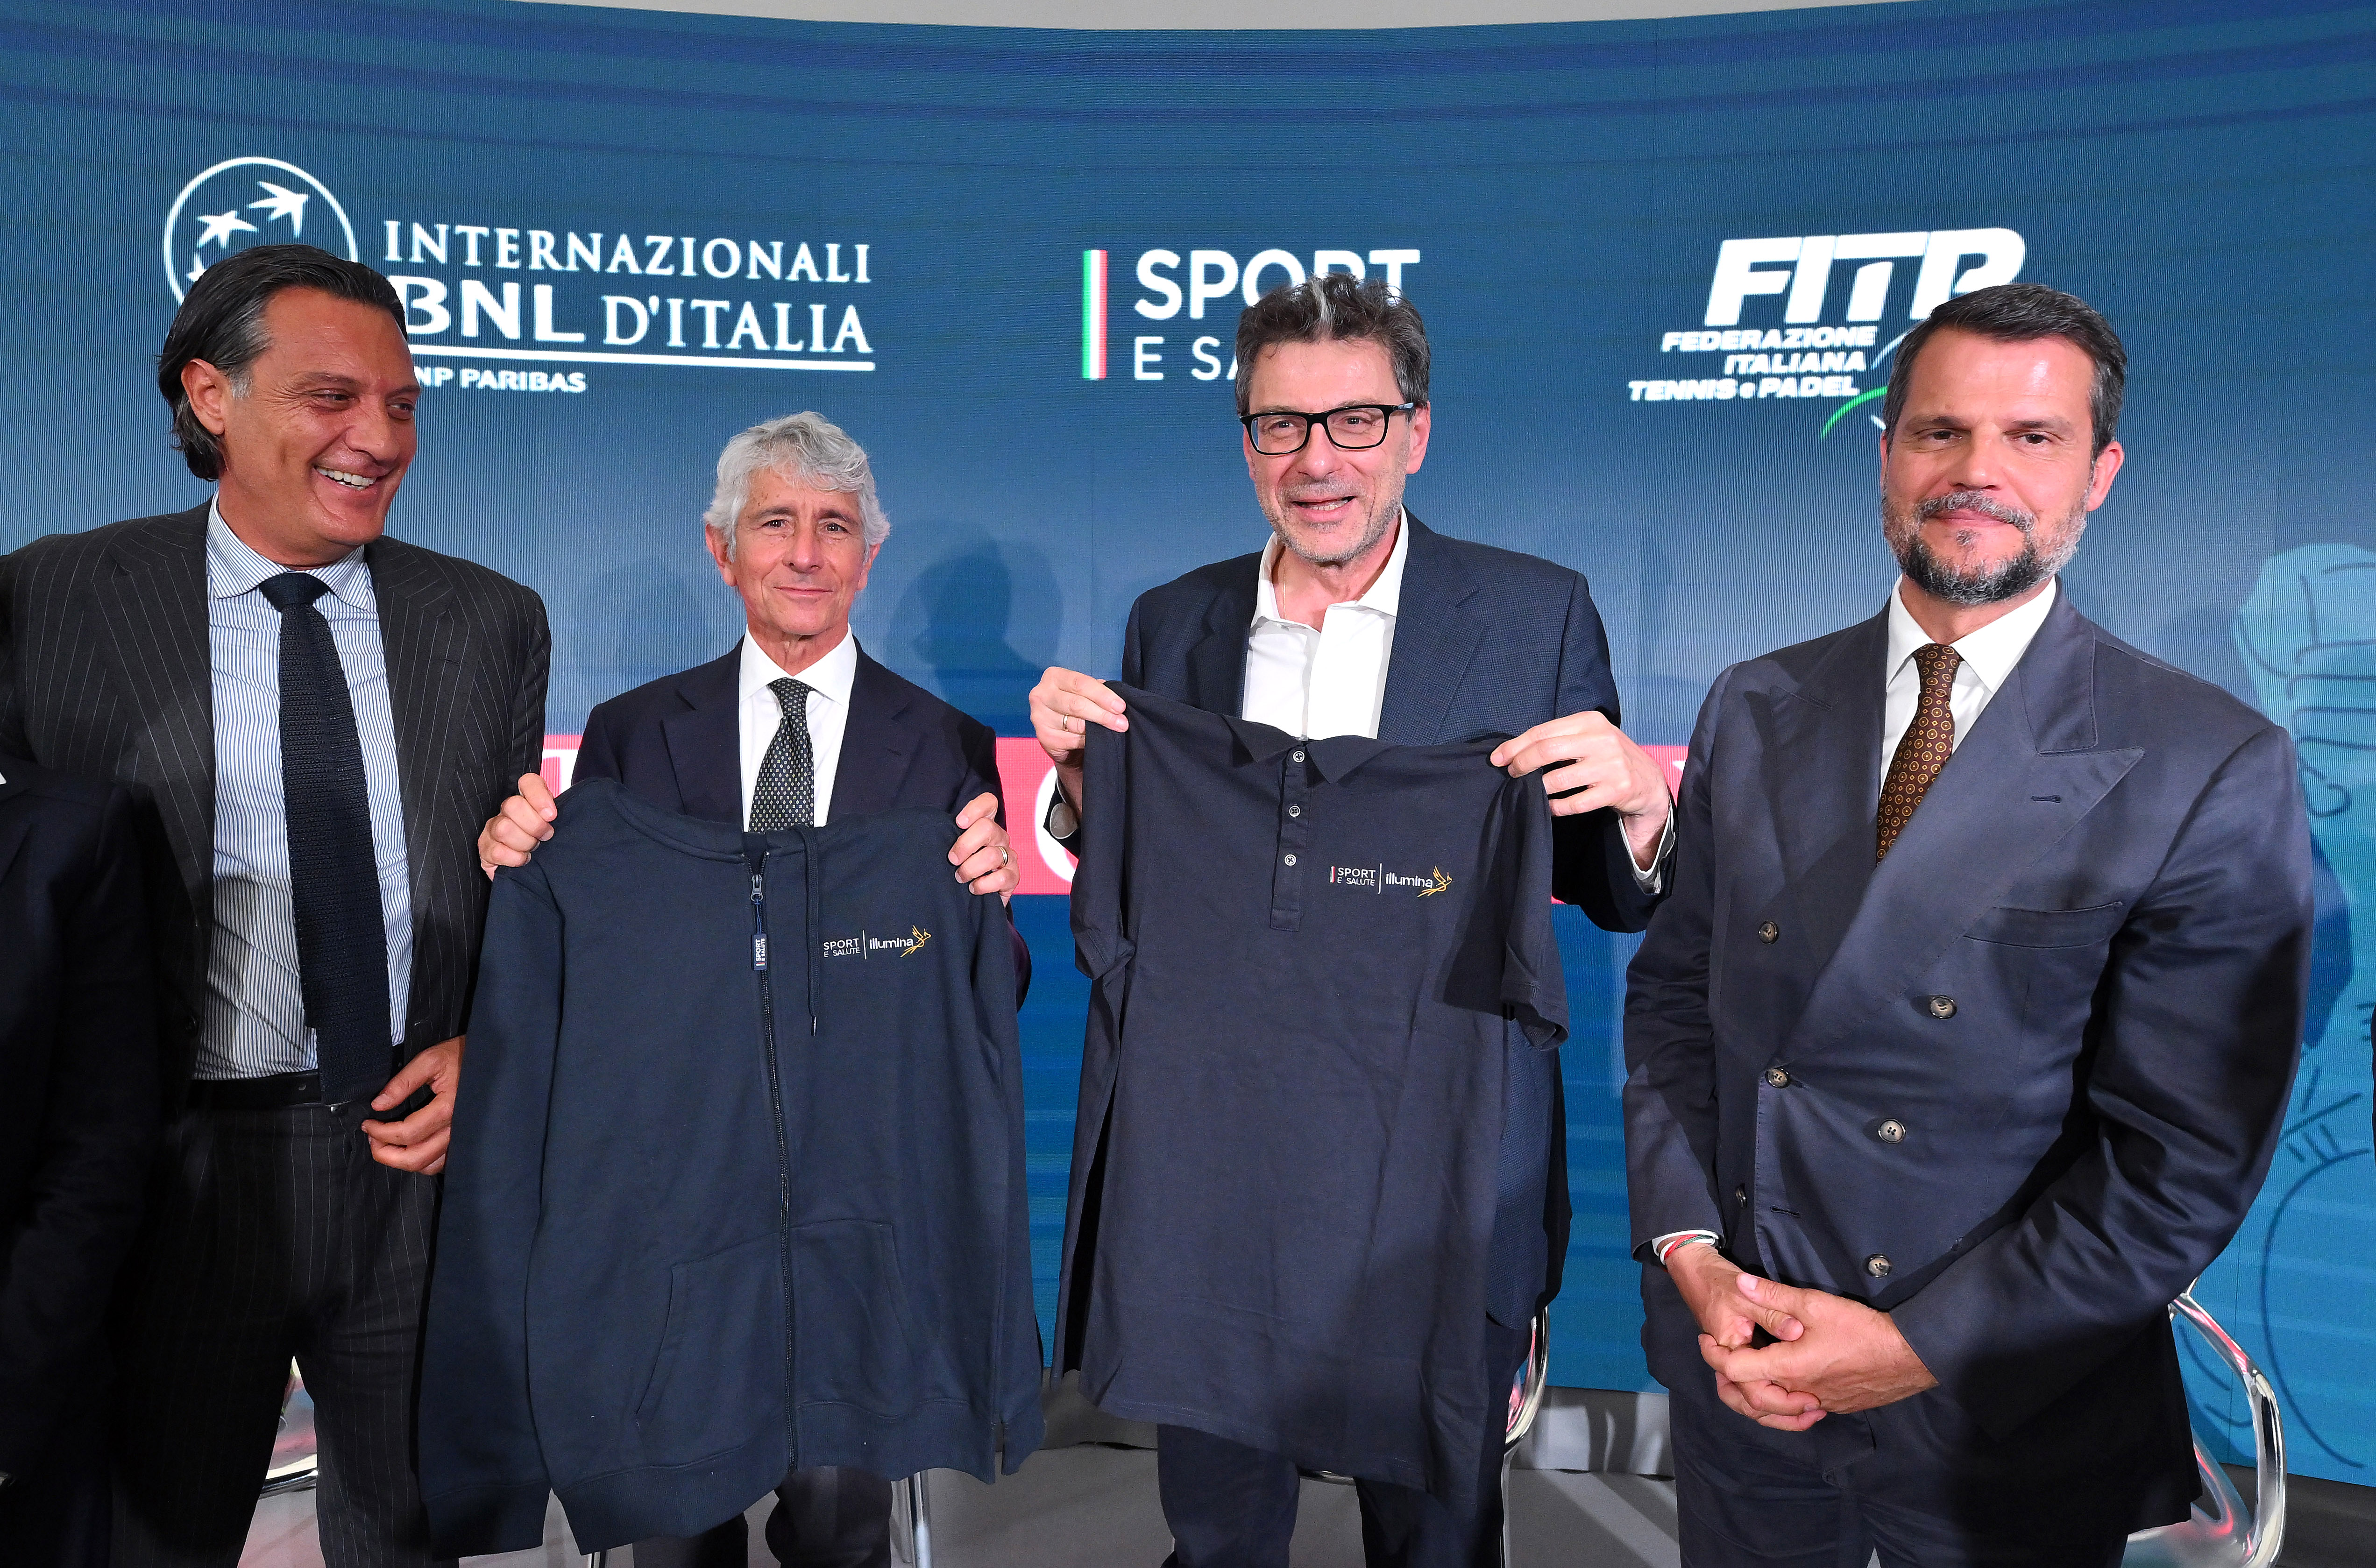 Ministers Abodi and Giorgetti visitors of “Vita da Campioni”. Sport is a basic lever for the social, financial and cultural progress of the nation